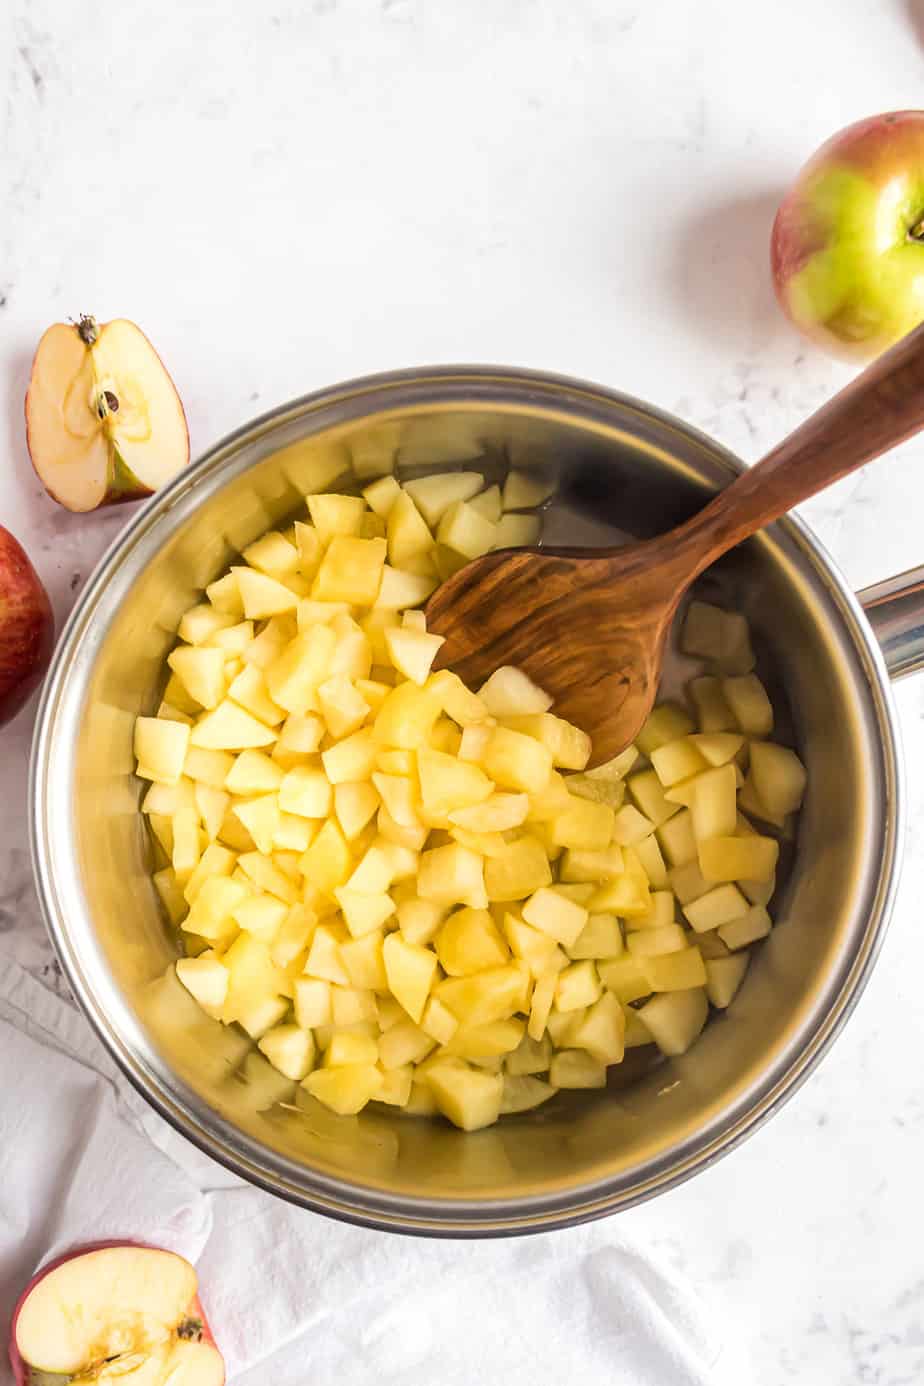 Cooked apples in a pan being stirred with a wooden spoon.